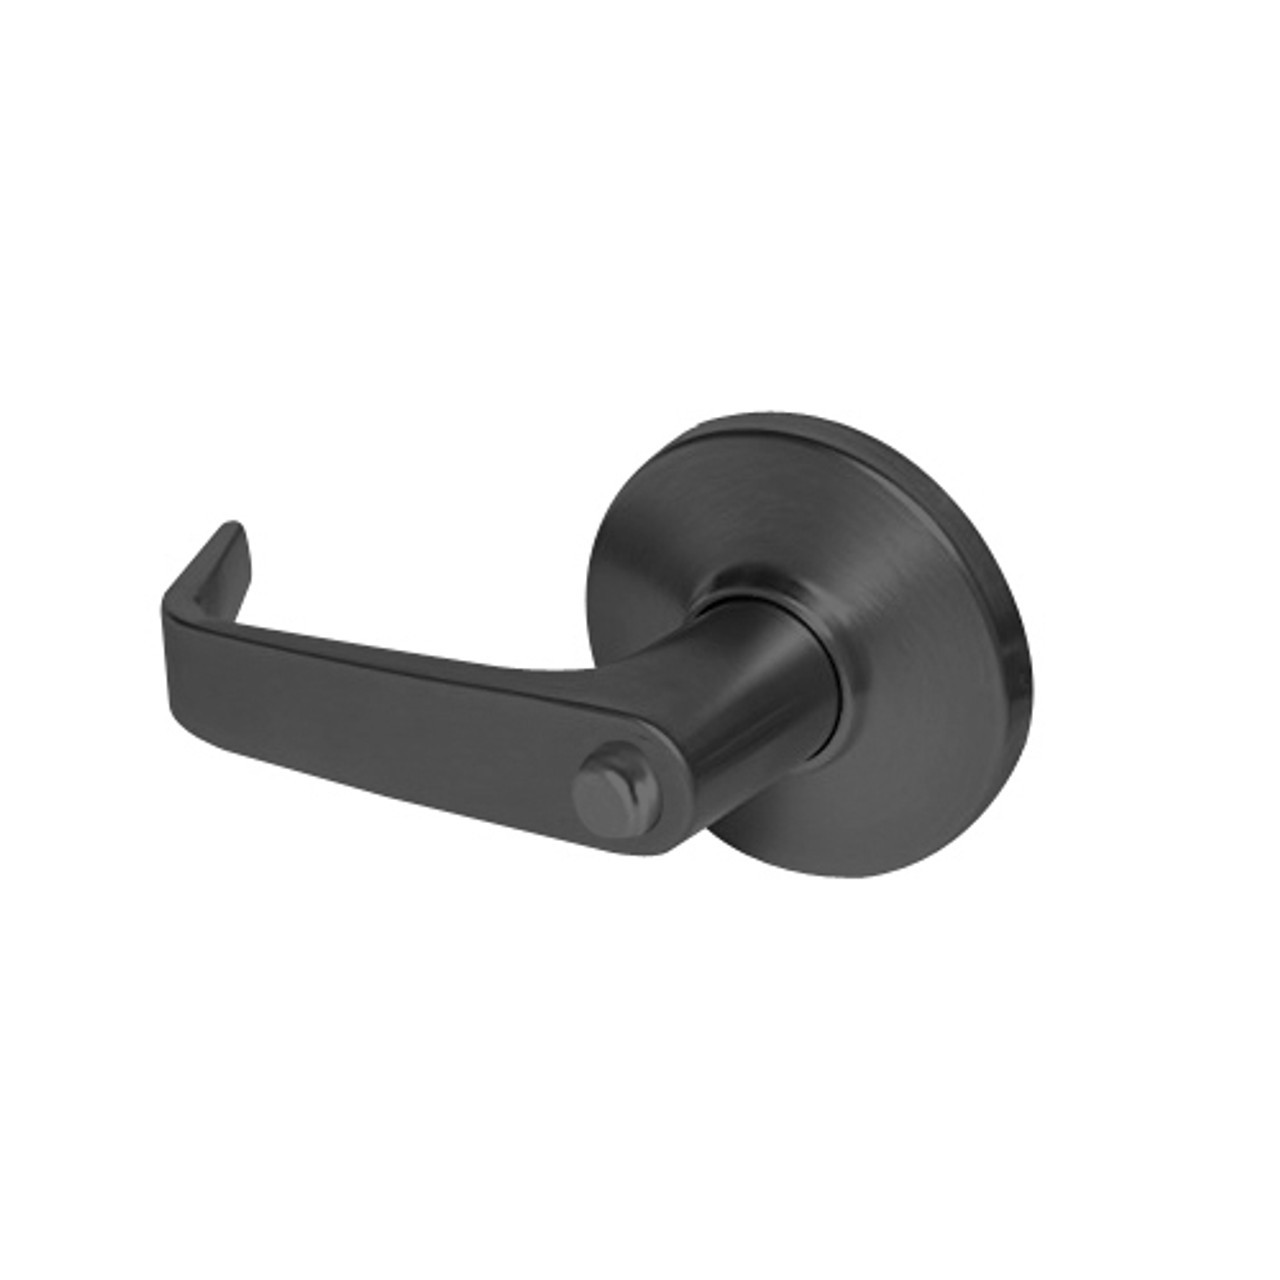 9K30L15DSTK622LM Best 9K Series Privacy Heavy Duty Cylindrical Lever Locks with Contour Angle with Return Lever Design in Black